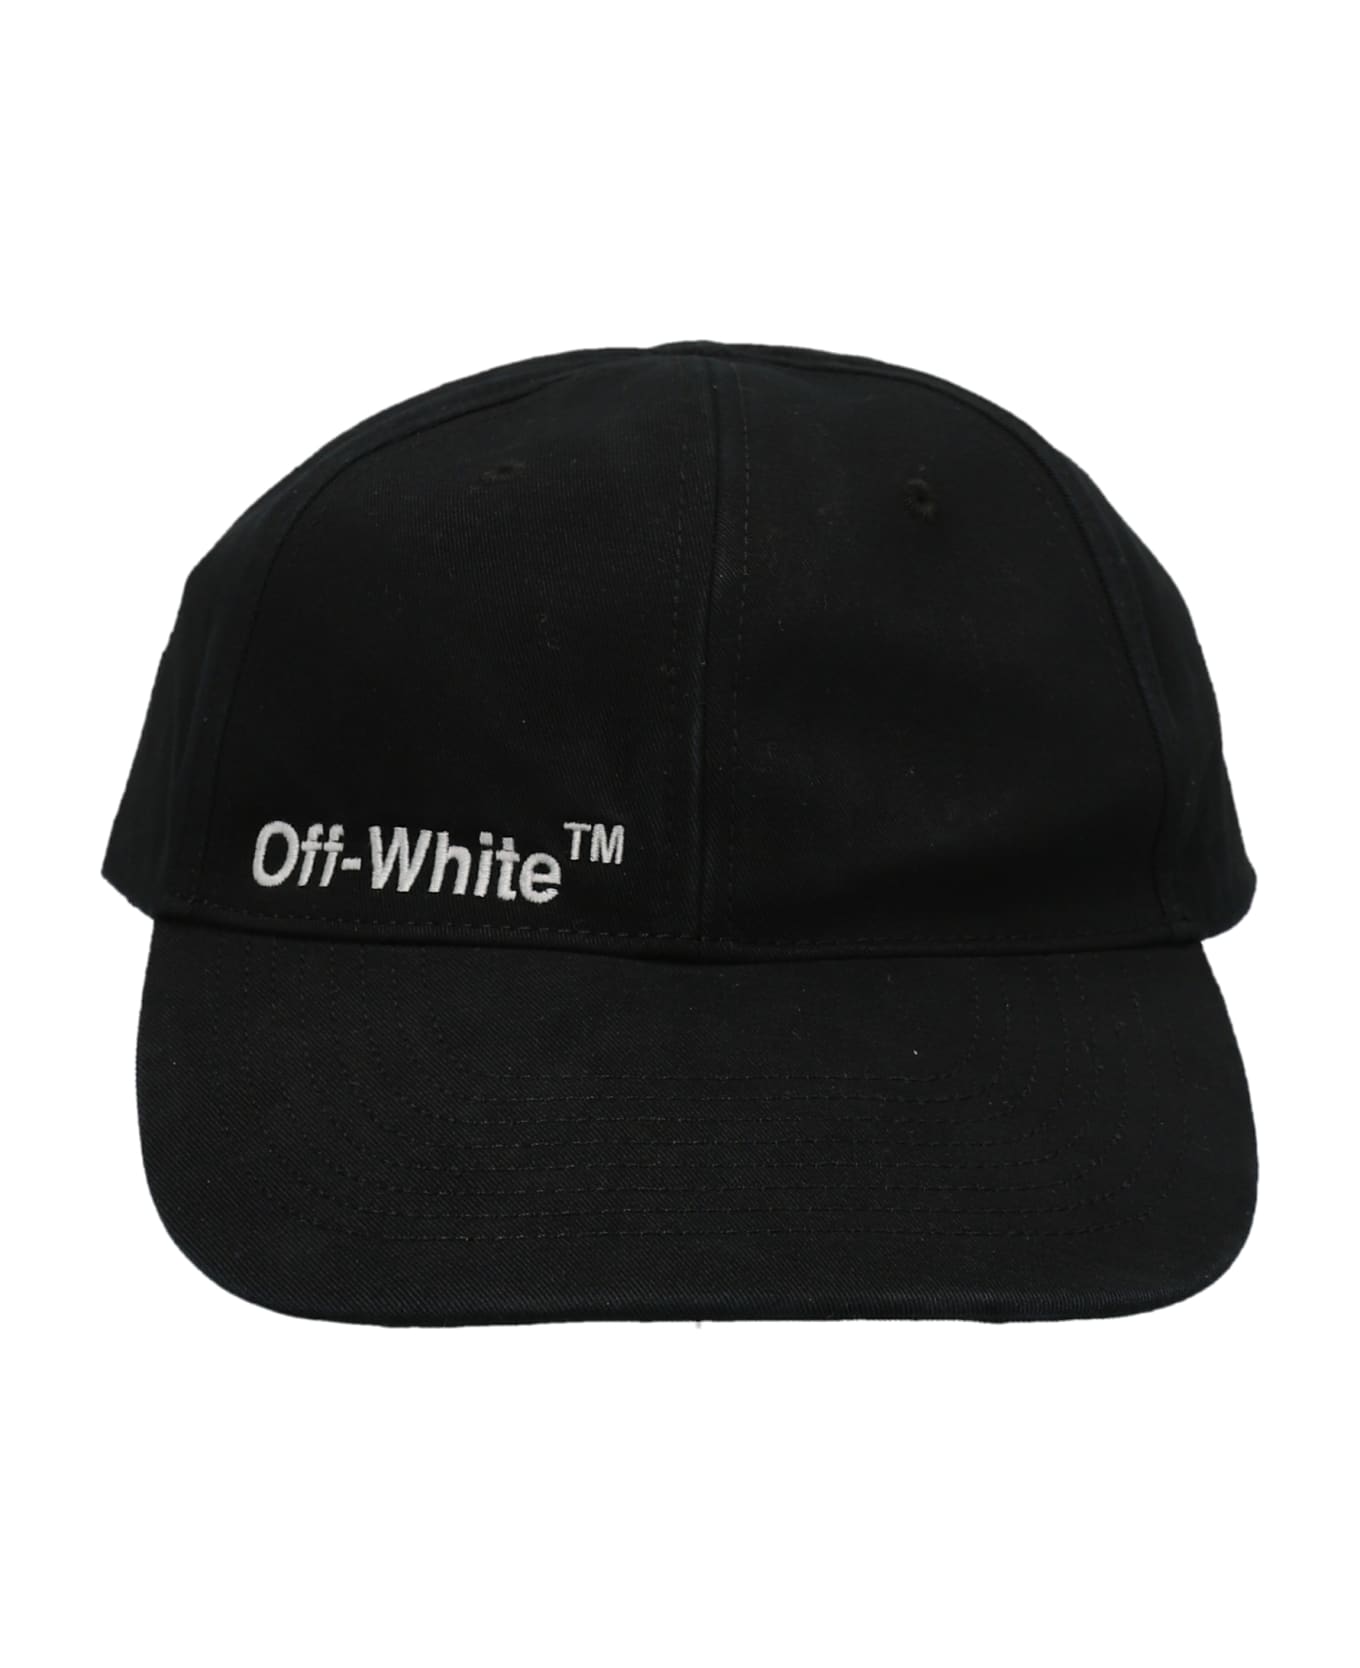 Off-White 'hellvetica Industrial' Cap - White/Black